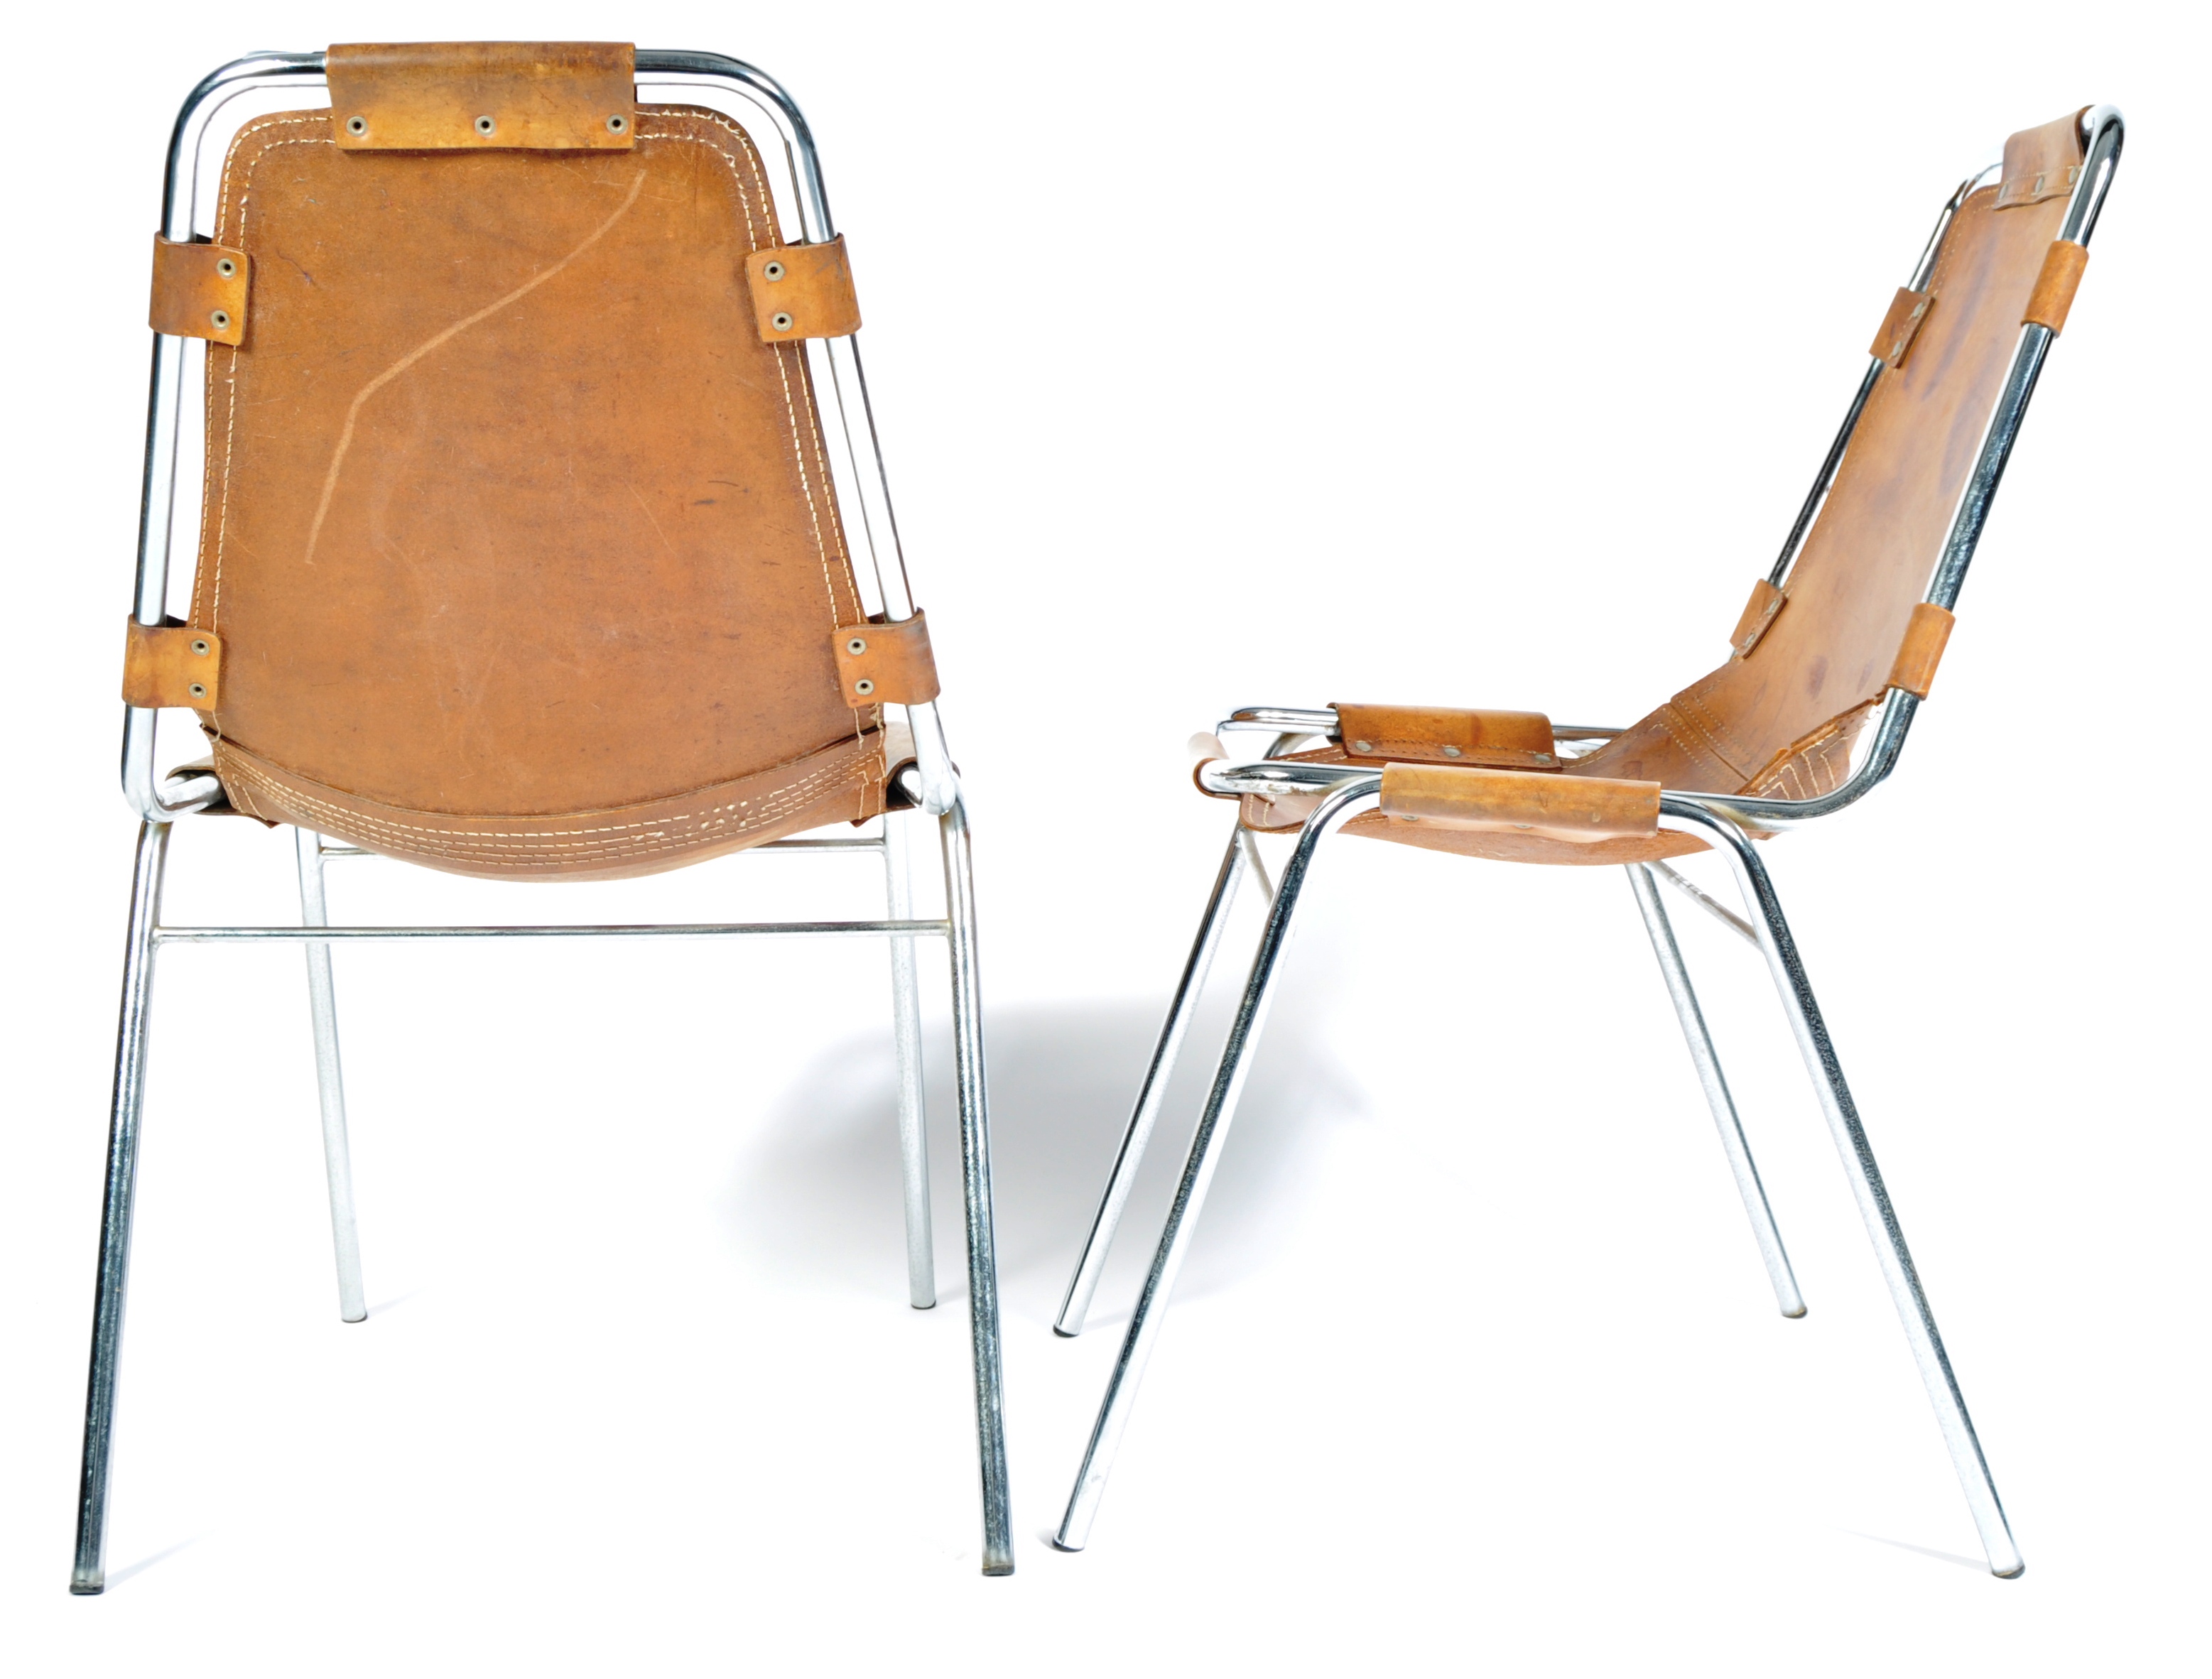 CASSINA LES ARC ORIGINAL 1970'S RETRO CHAIR BY CHARLOTTE PERRIAND - Image 4 of 7